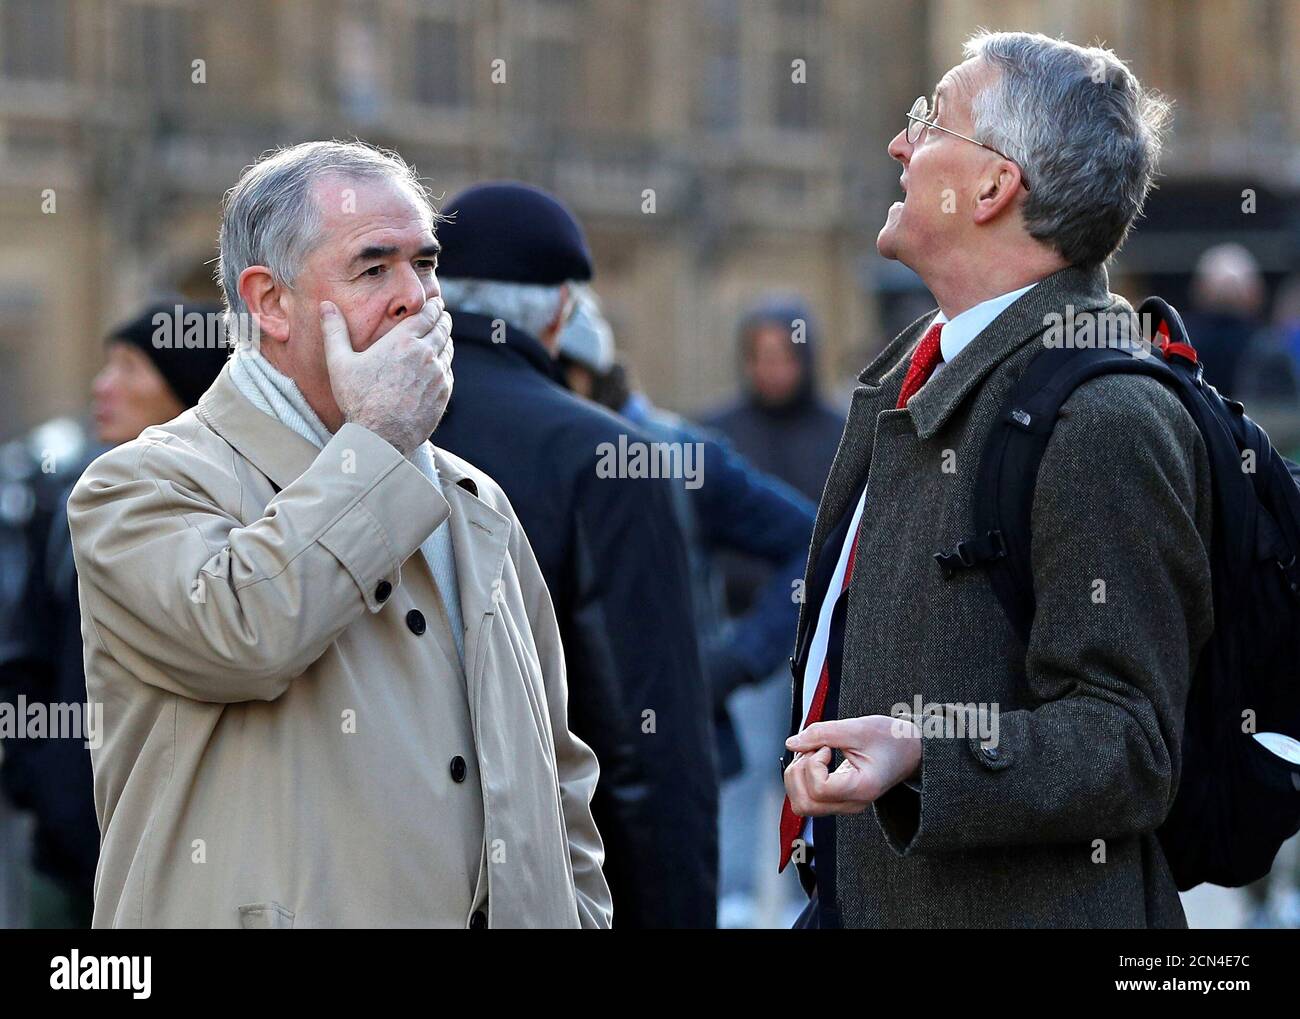 Britain's Attorney General Geoffrey Cox talks to Chair of the Exiting the European Union Select Committee Labour MP Hilary Benn outside the Palace of Westminster in London, Britain, December 11, 2018. REUTERS/Peter Nicholls Stock Photo